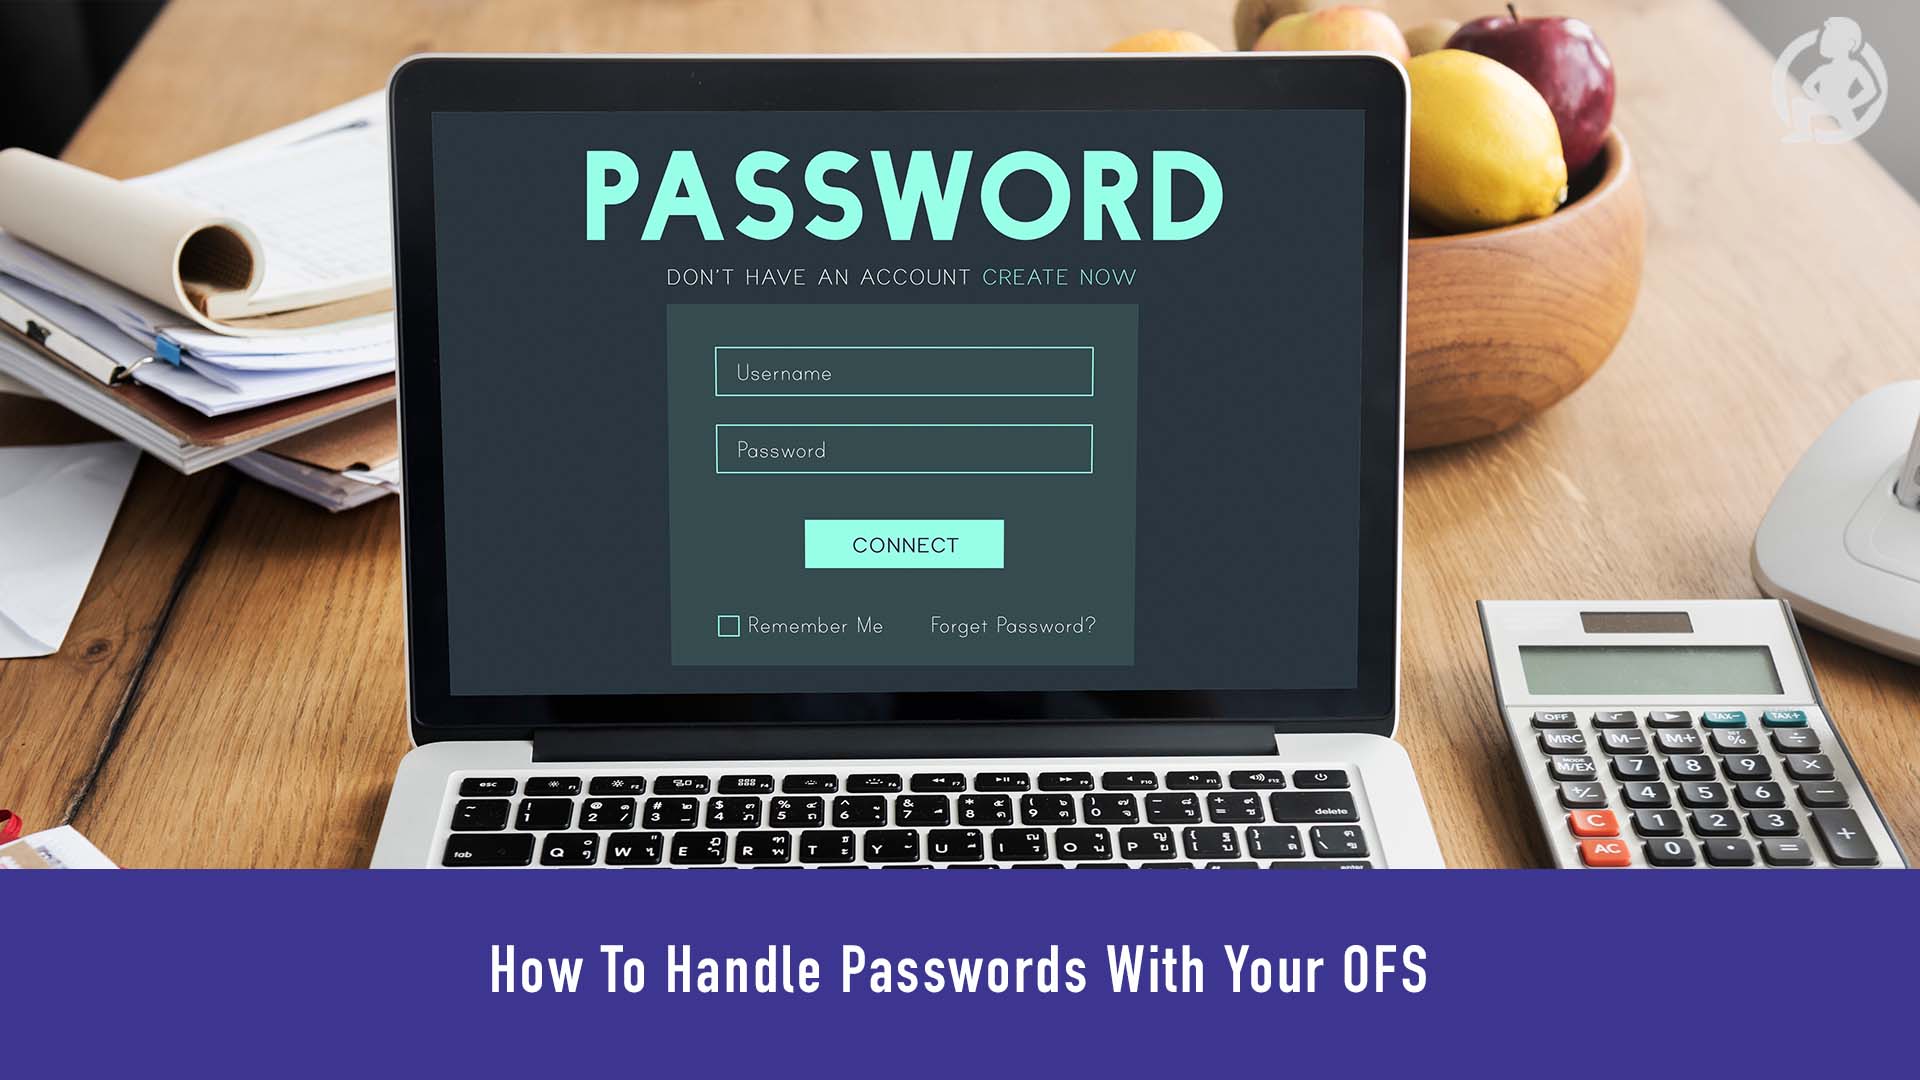 How To Handle Passwords With Your OFS